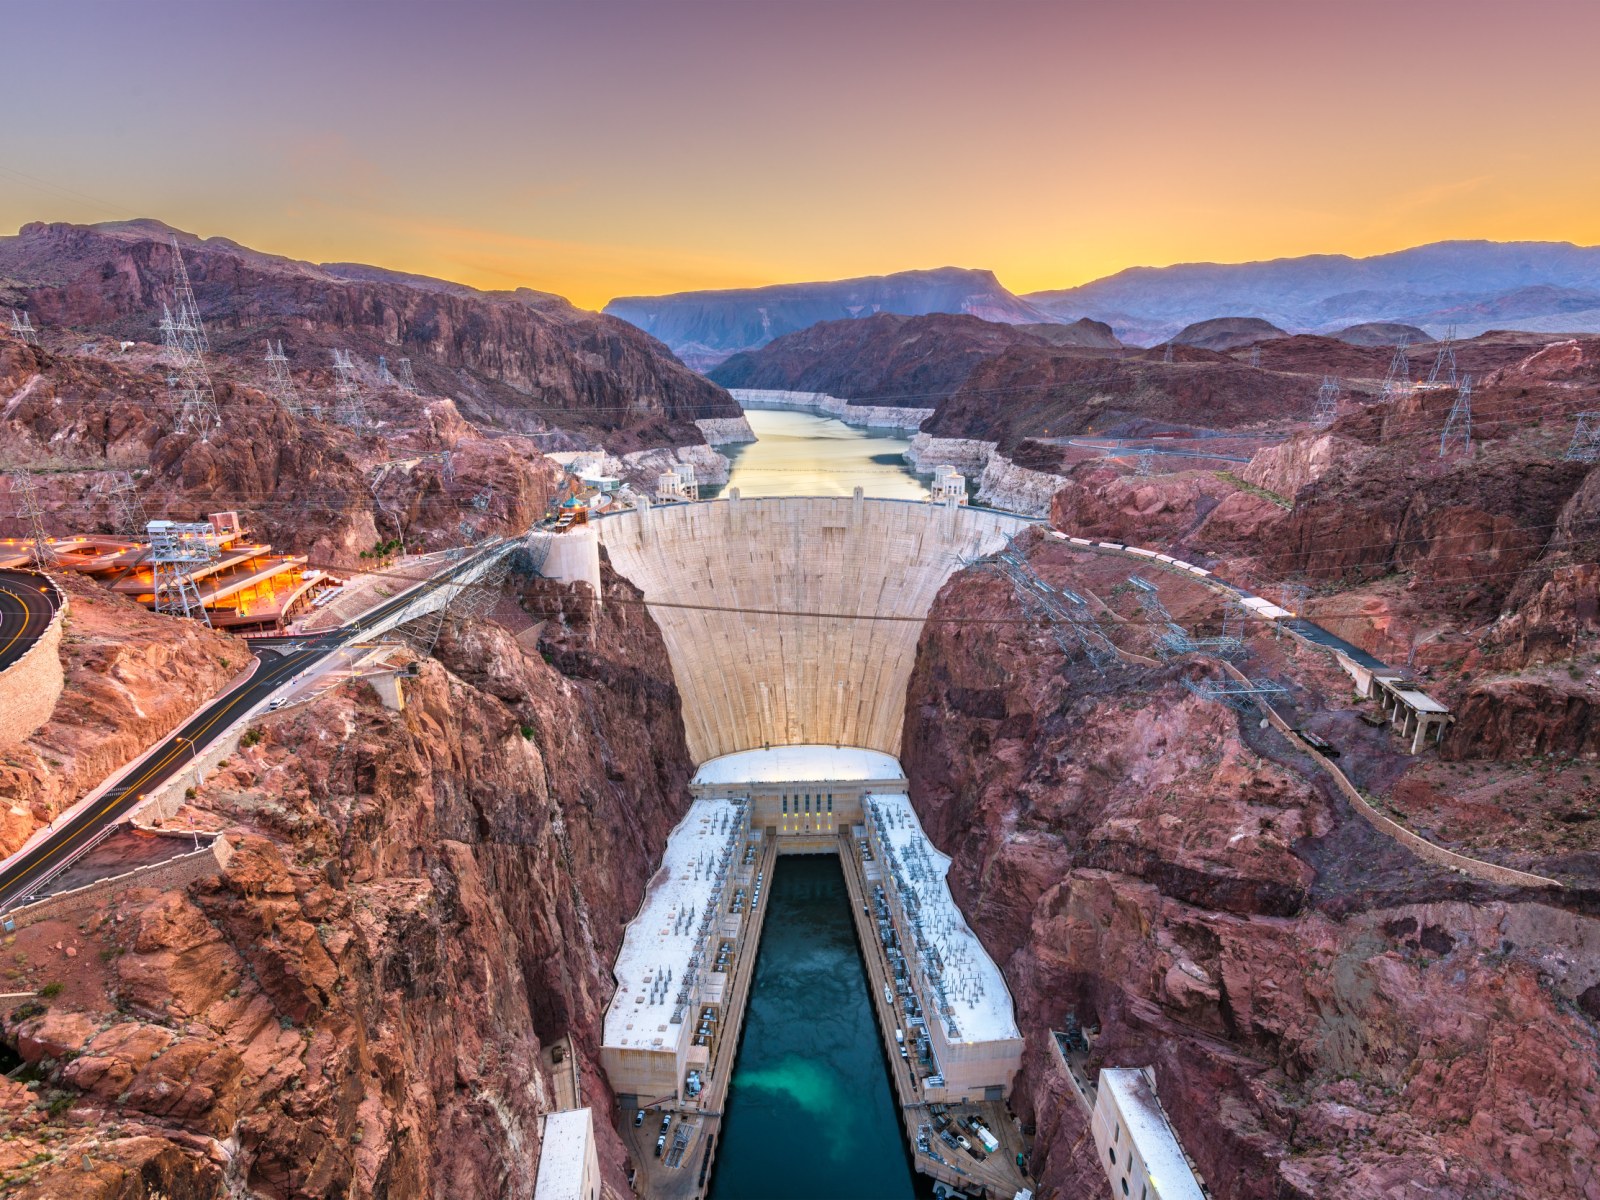 Why Was the Hoover Dam Built?